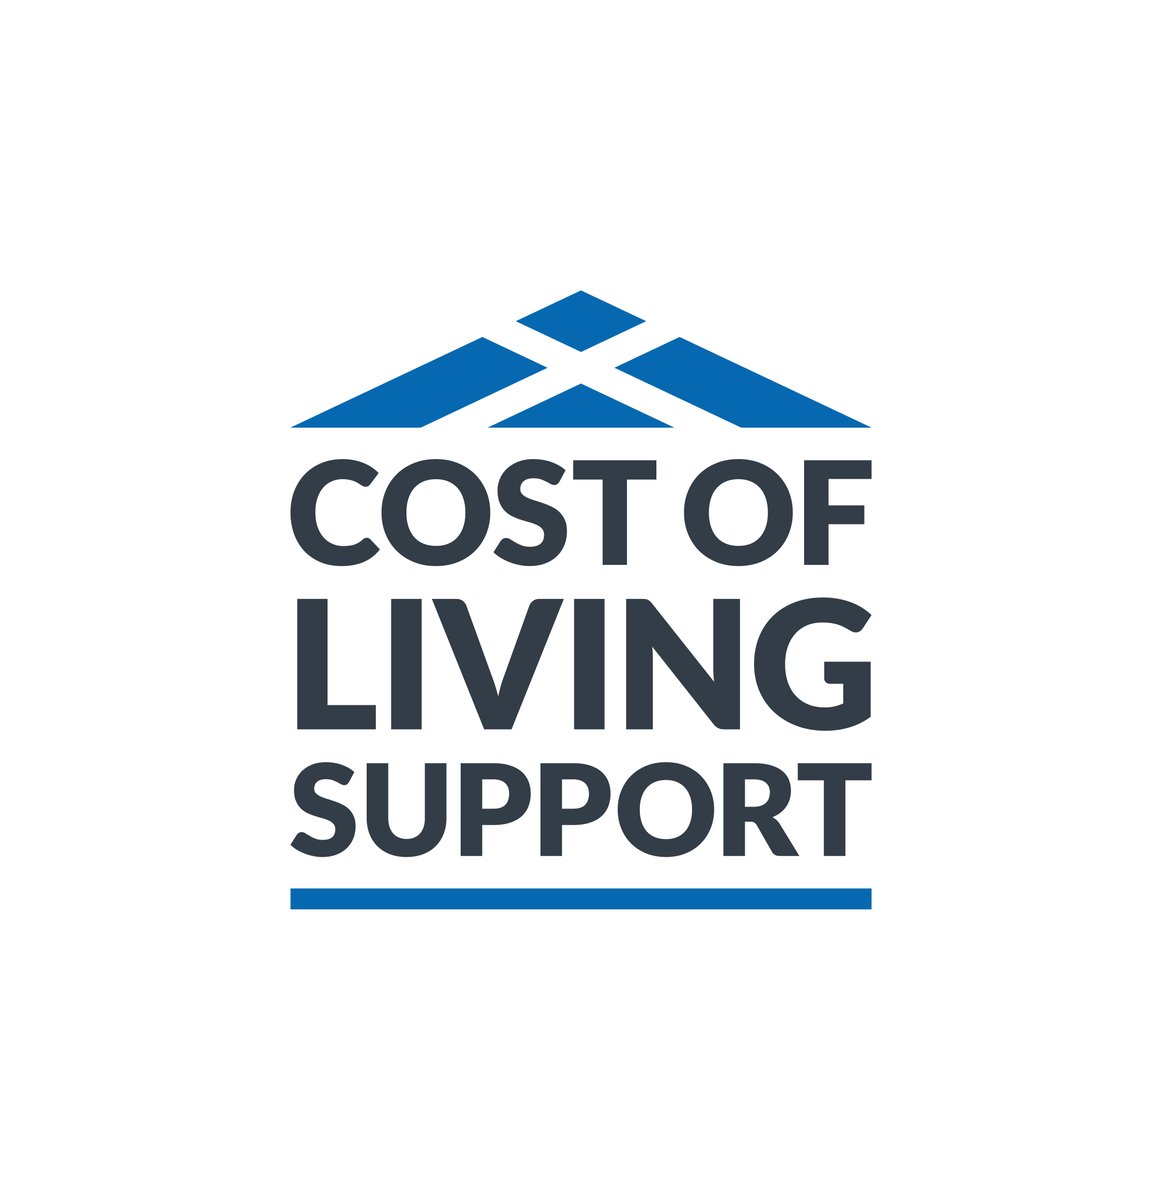 A new dedicated website has launched providing advice and financial #support available to help people in Scotland with the #CostOfLiving. Find out more - costofliving.campaign.gov.scot